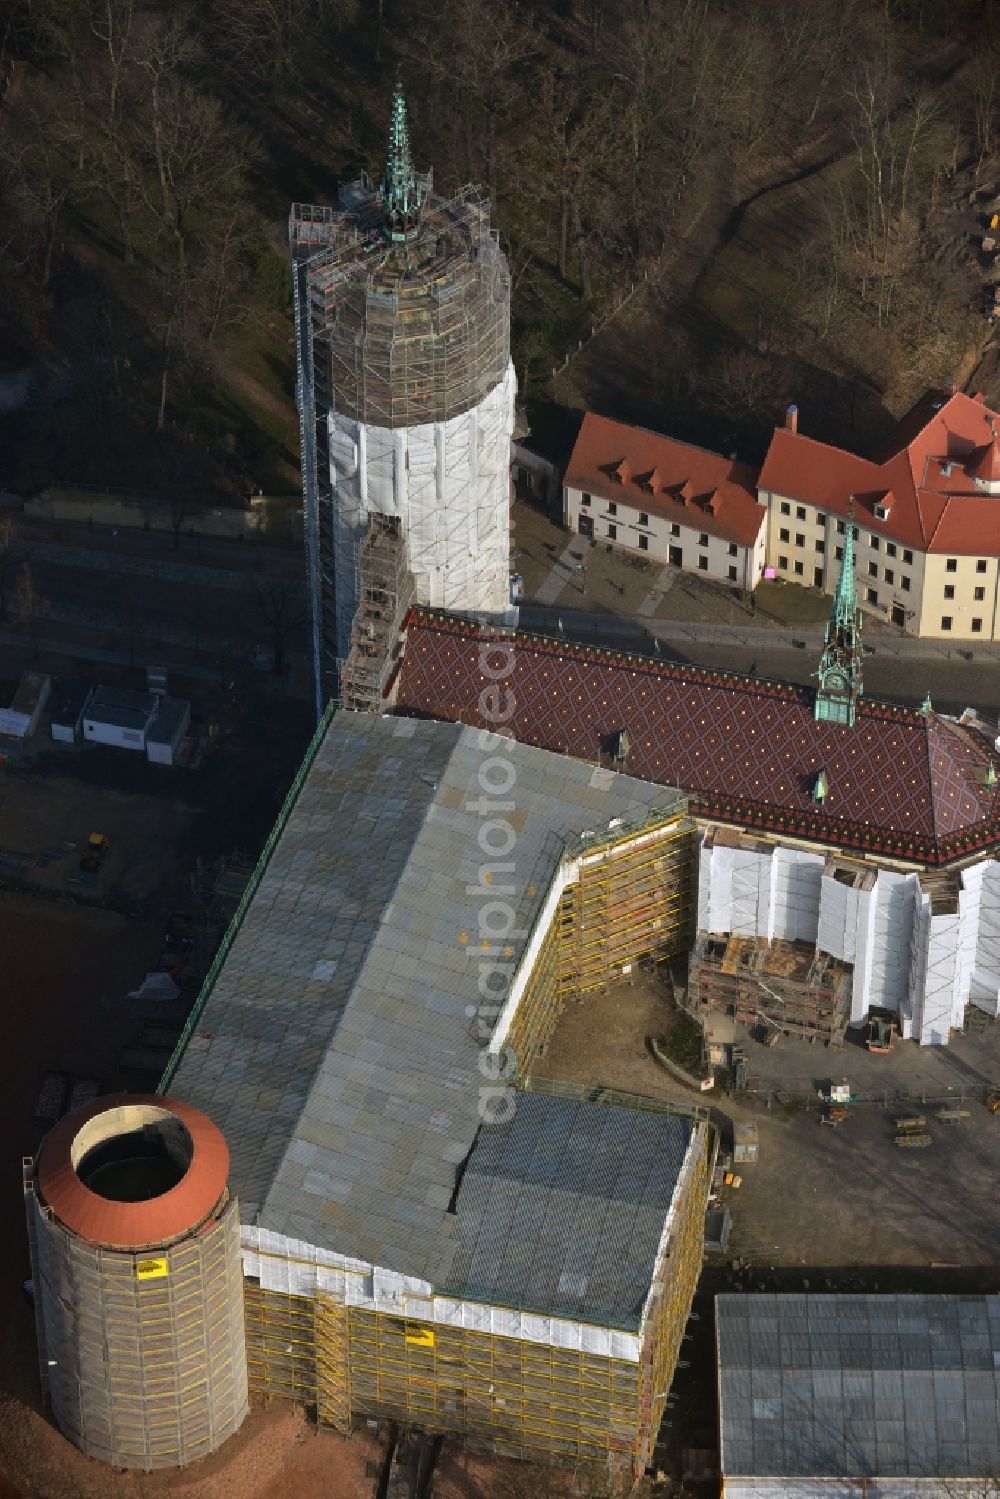 Wittenberg from above - View of the castle church of Wittenberg. The castle with its 88 m high Gothic tower at the west end of the town is a UNESCO World Heritage Site. The first mention of the castle dates from 1187. It gained fame as in 1517 the Wittenberg Augustinian monk and theology professor Martin Luther spread his 95 disputation